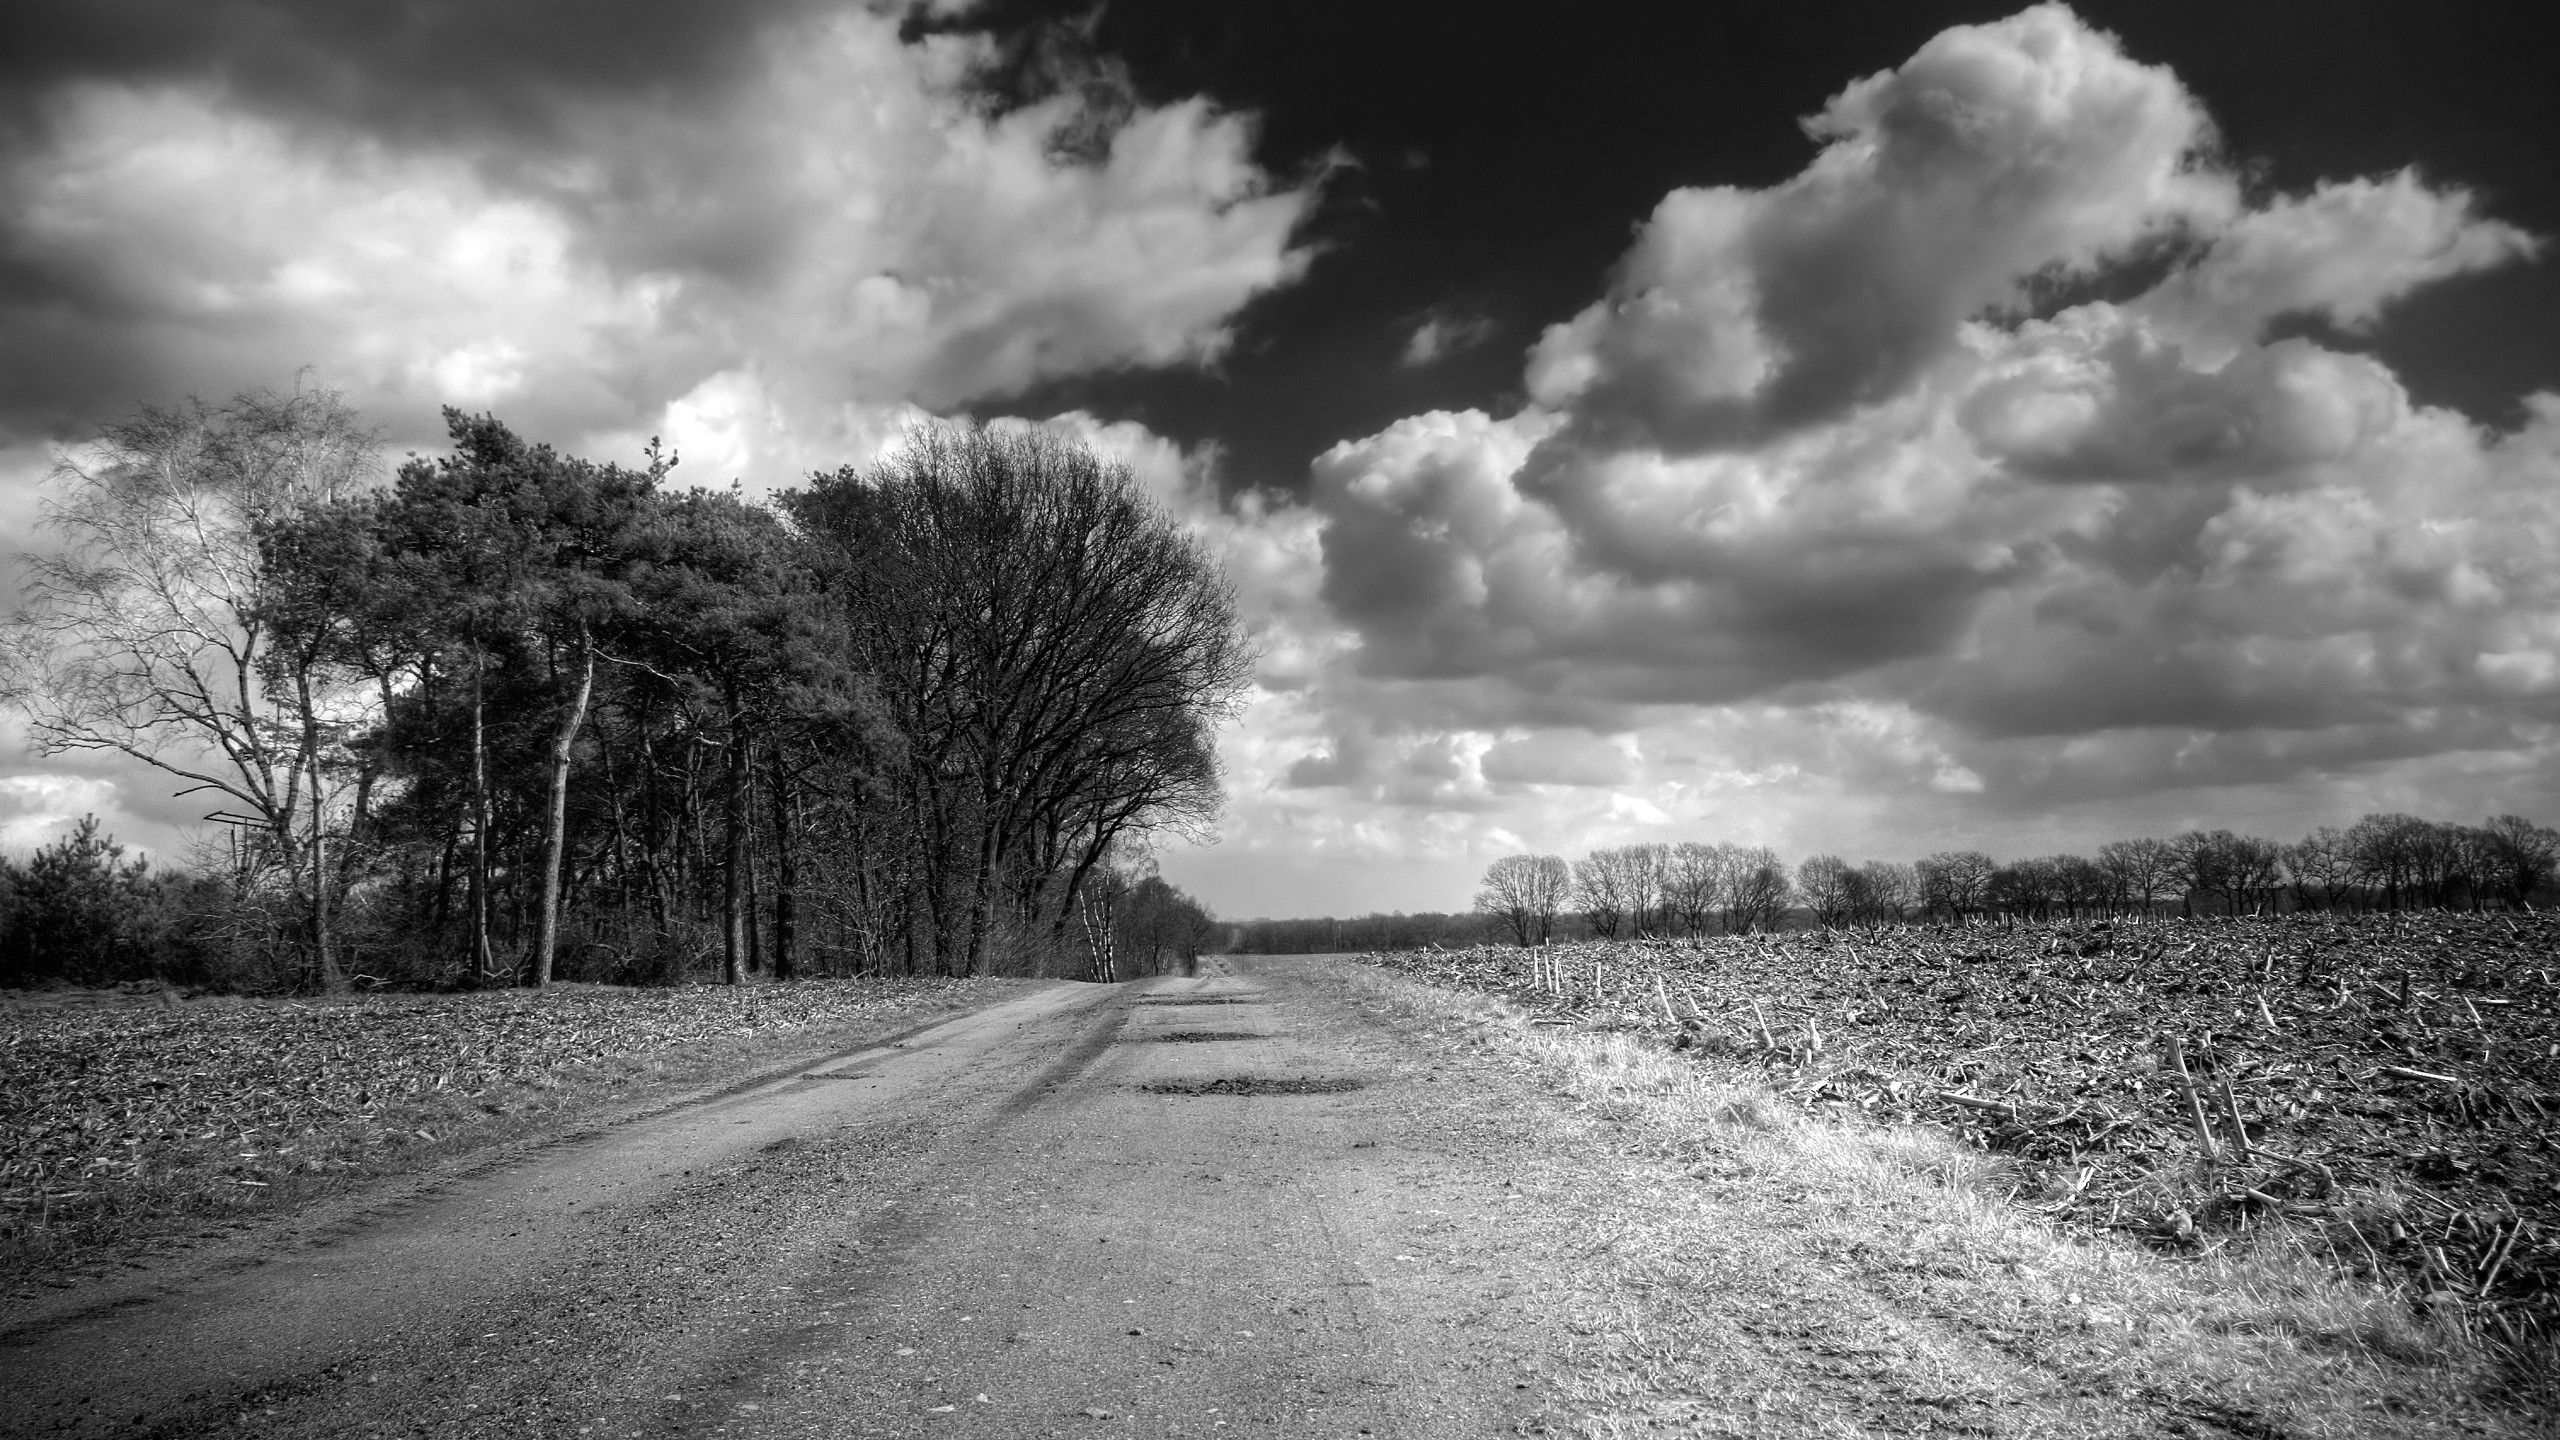 Download Wallpaper 2560x1440 Road, Country, Black And White, Trees